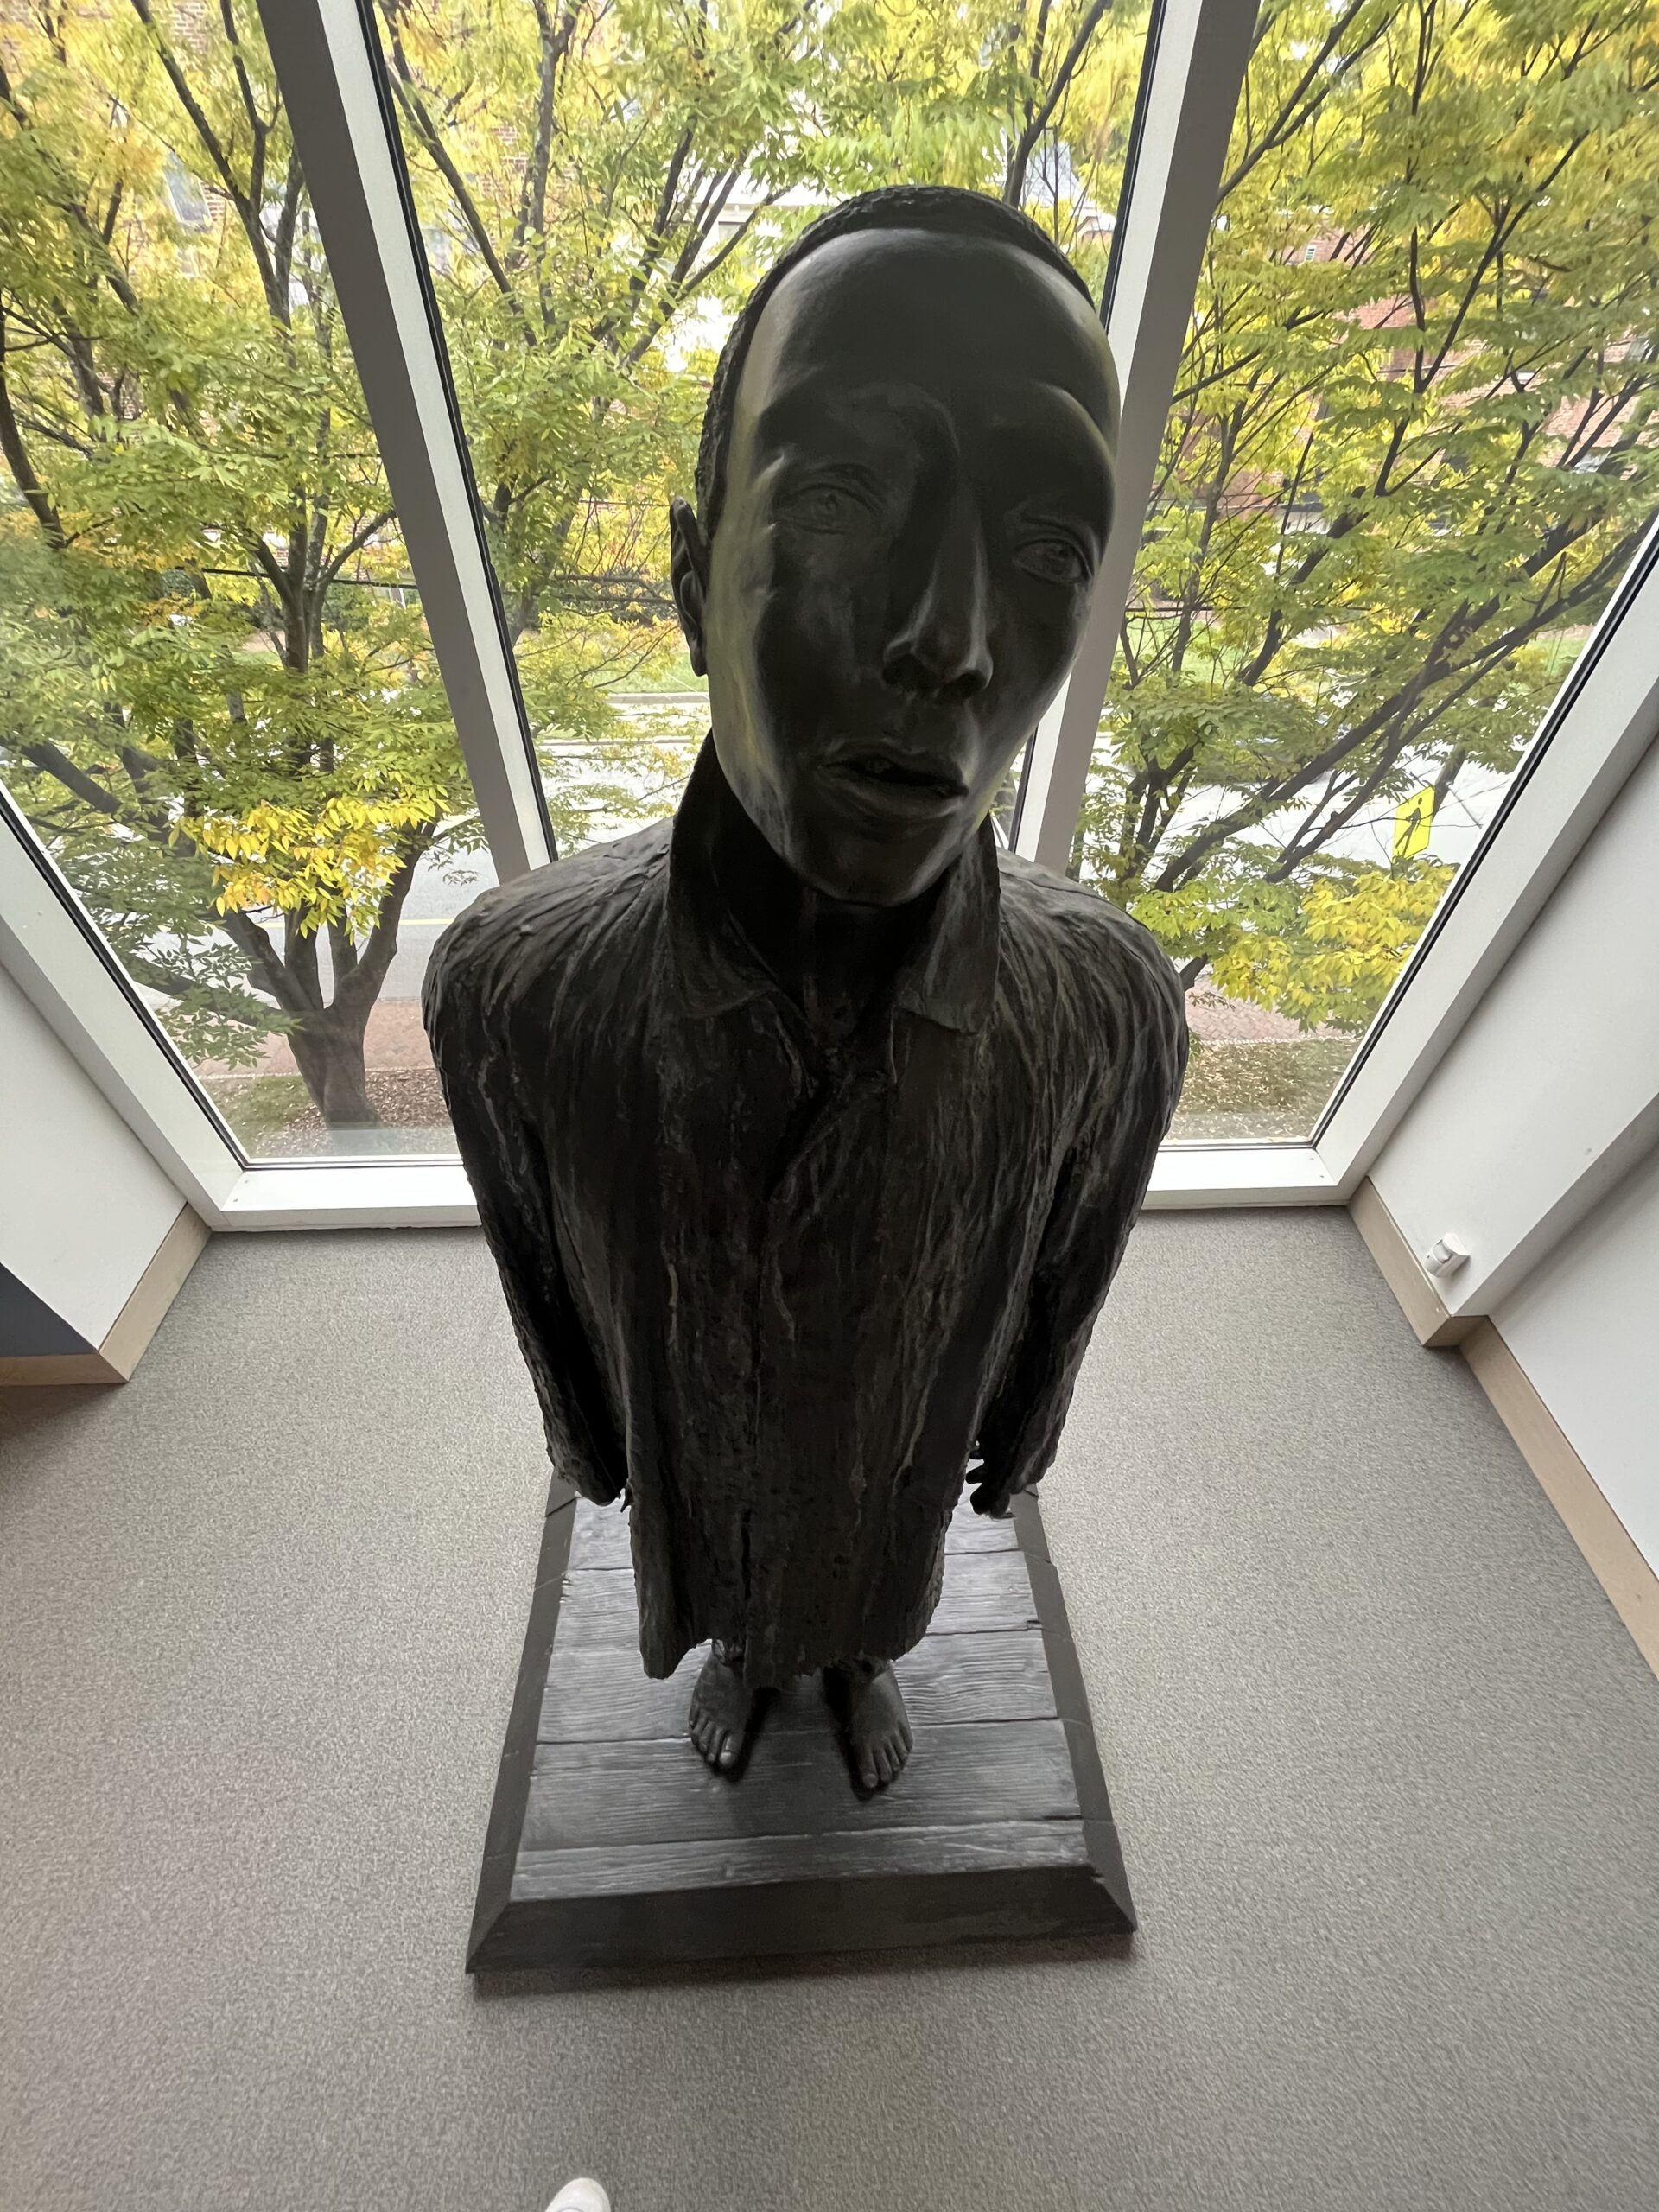 Top-down view of a life-sized sculpture of a figure in a long coat.